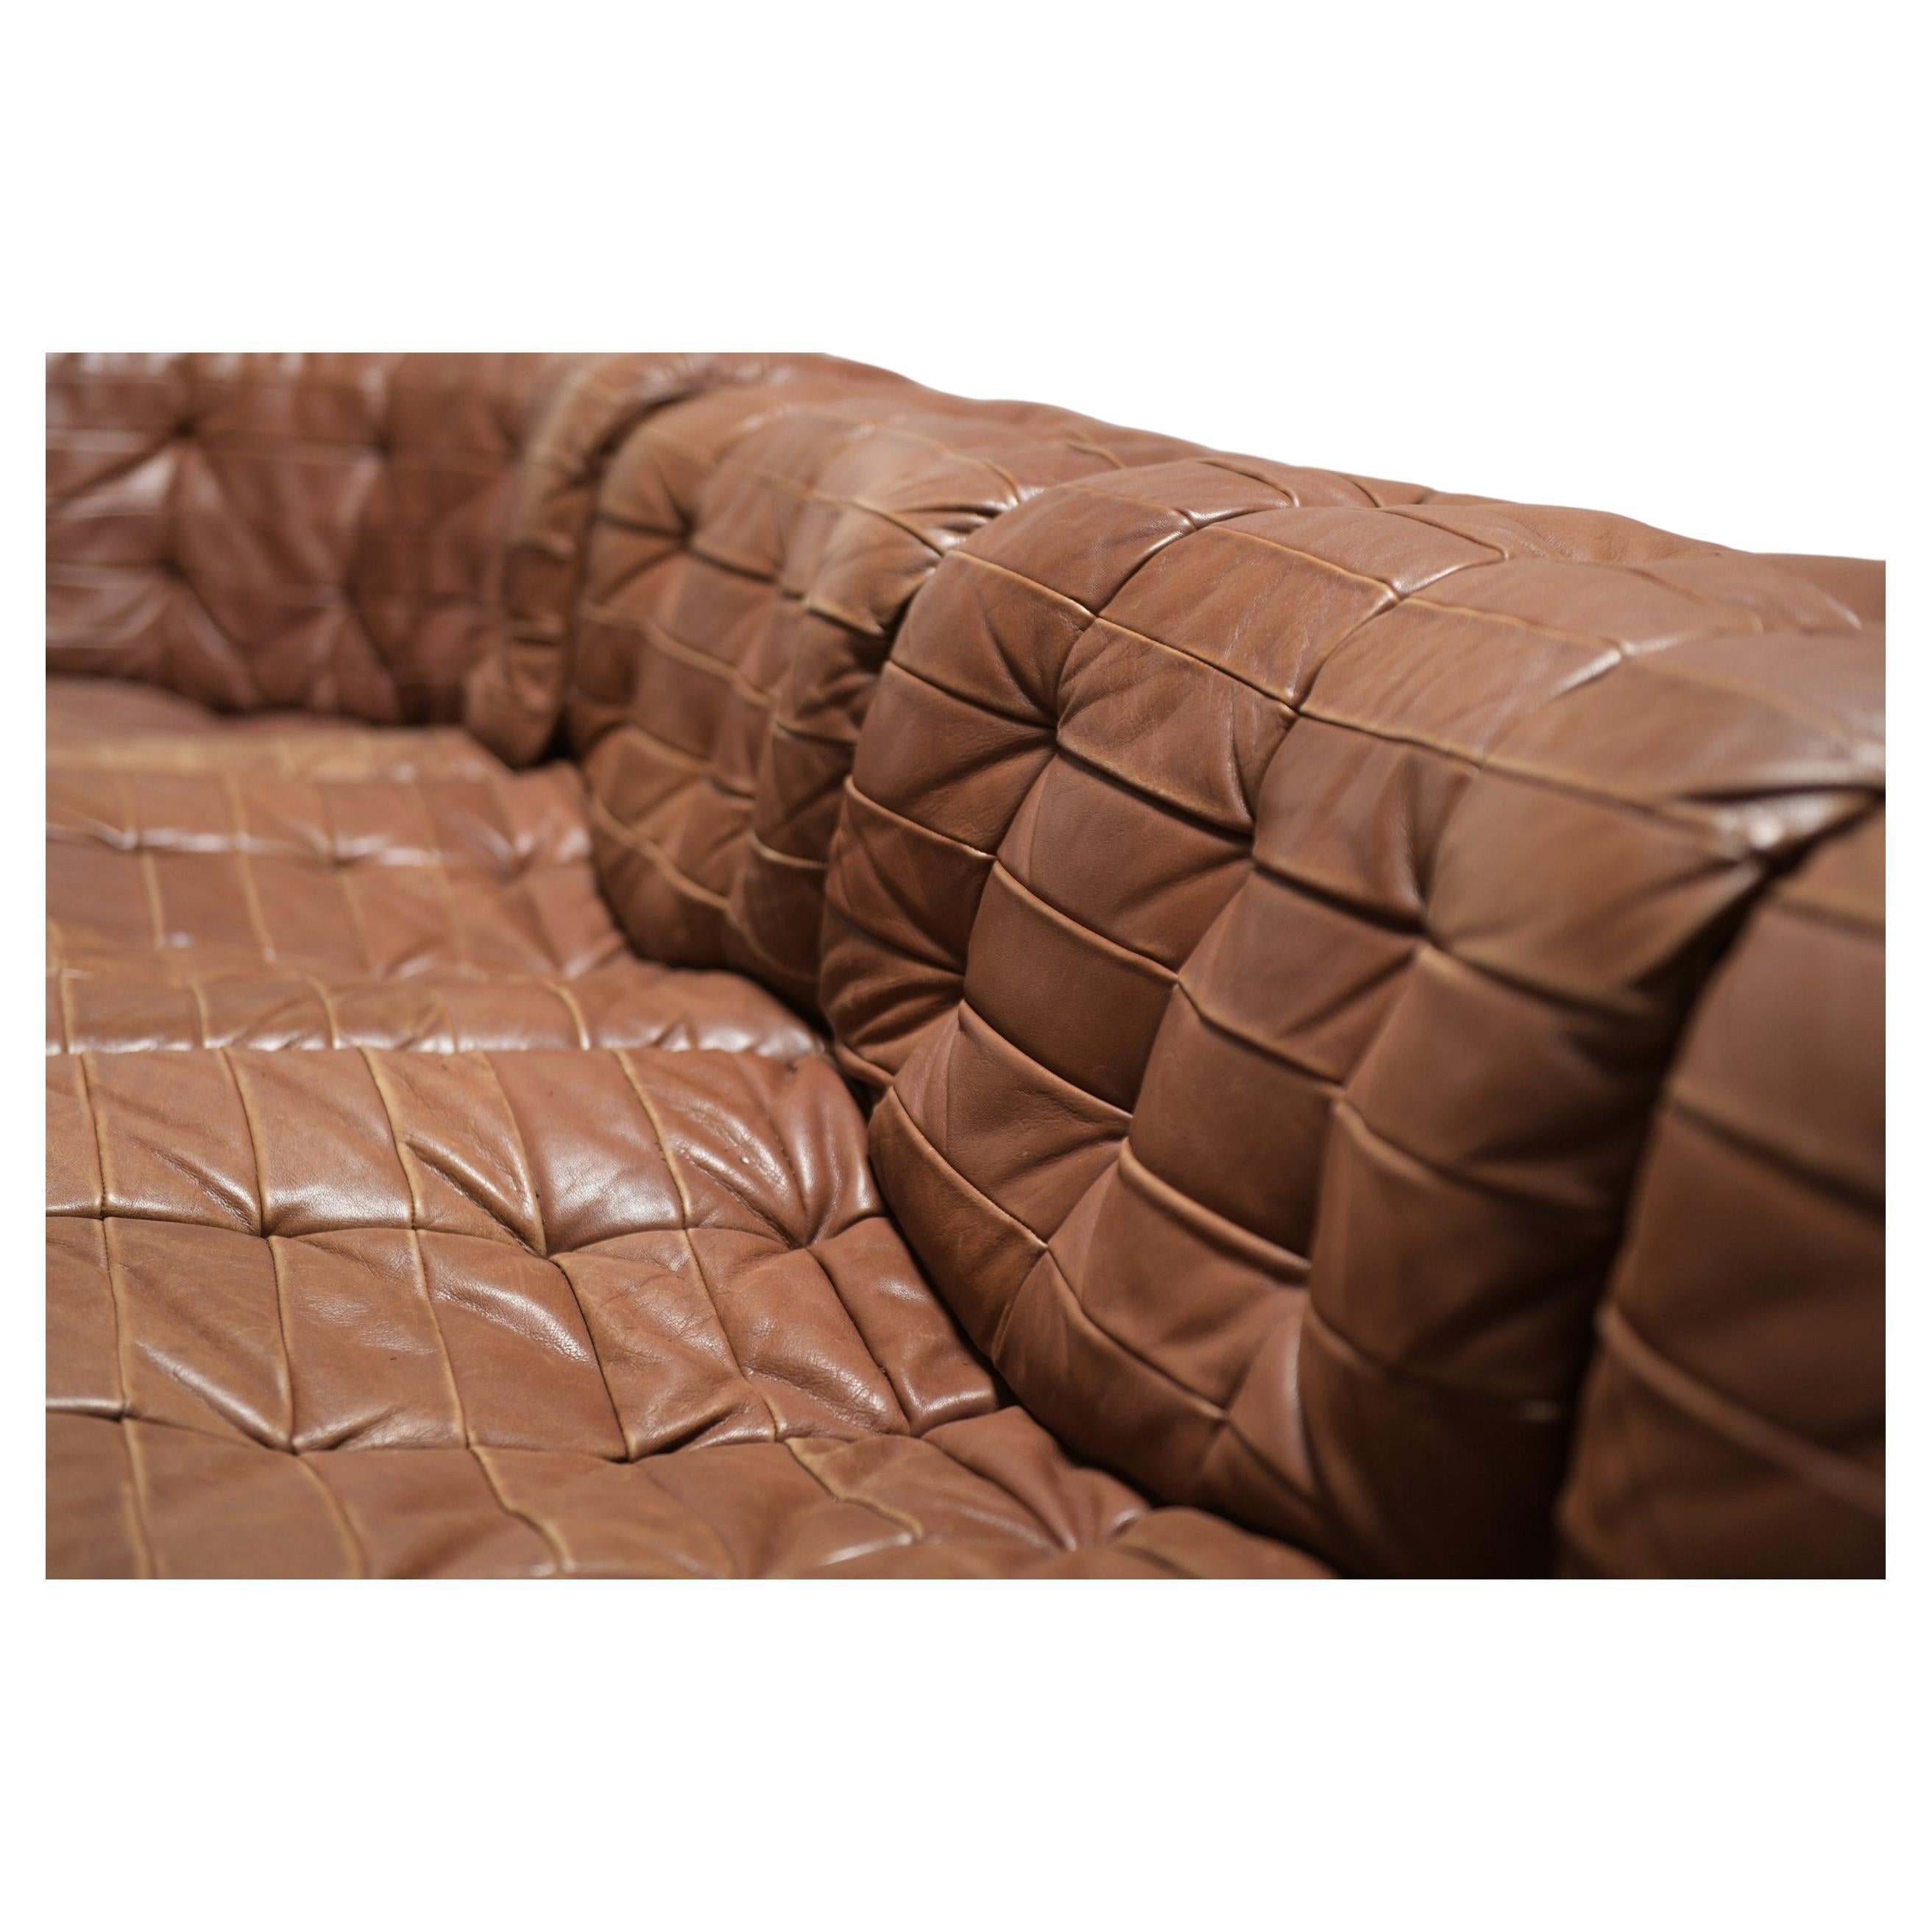 Late 20th Century De Sede DS11 Patchwork Leather Sectional in Caramel, Circa 1970s For Sale